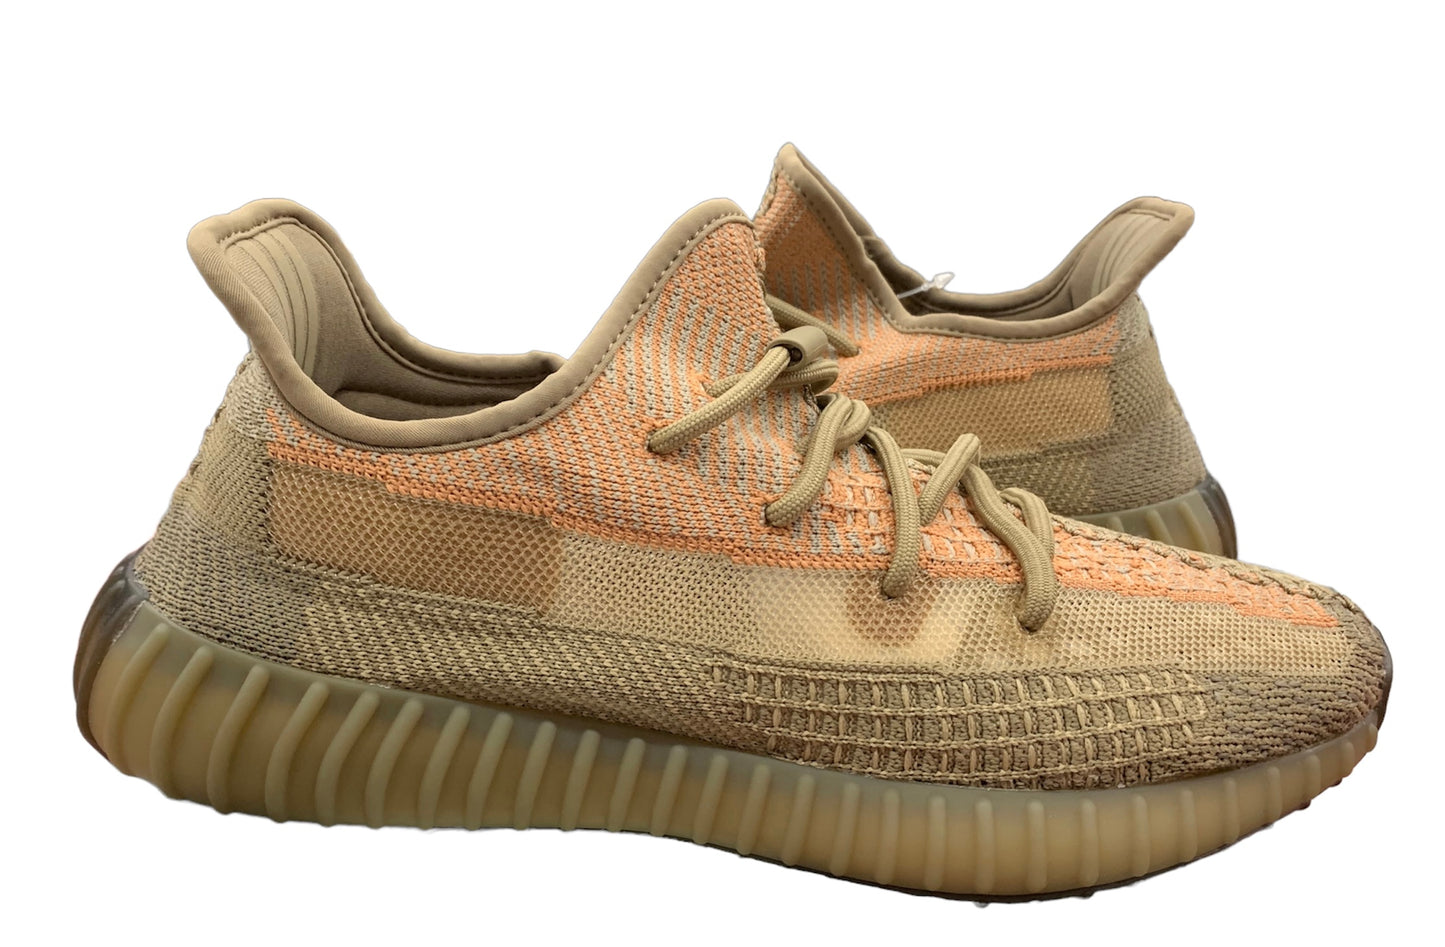 Yeezy Boost 350 “Sand Taupe” New